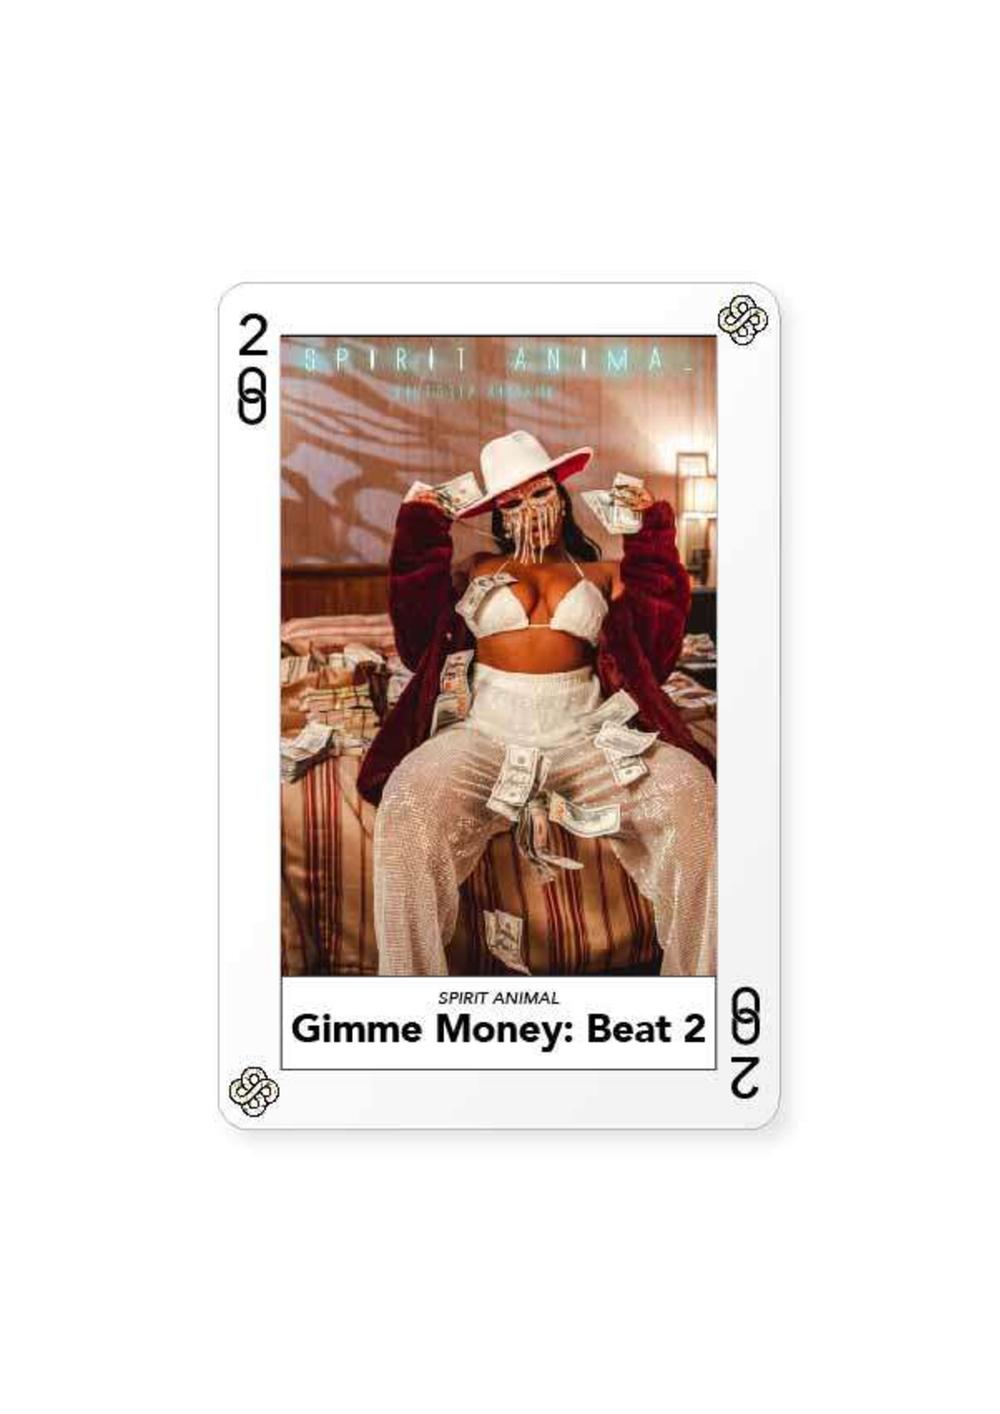 Certificate of Authenticity and Consignment - Gimme Money Beat 2